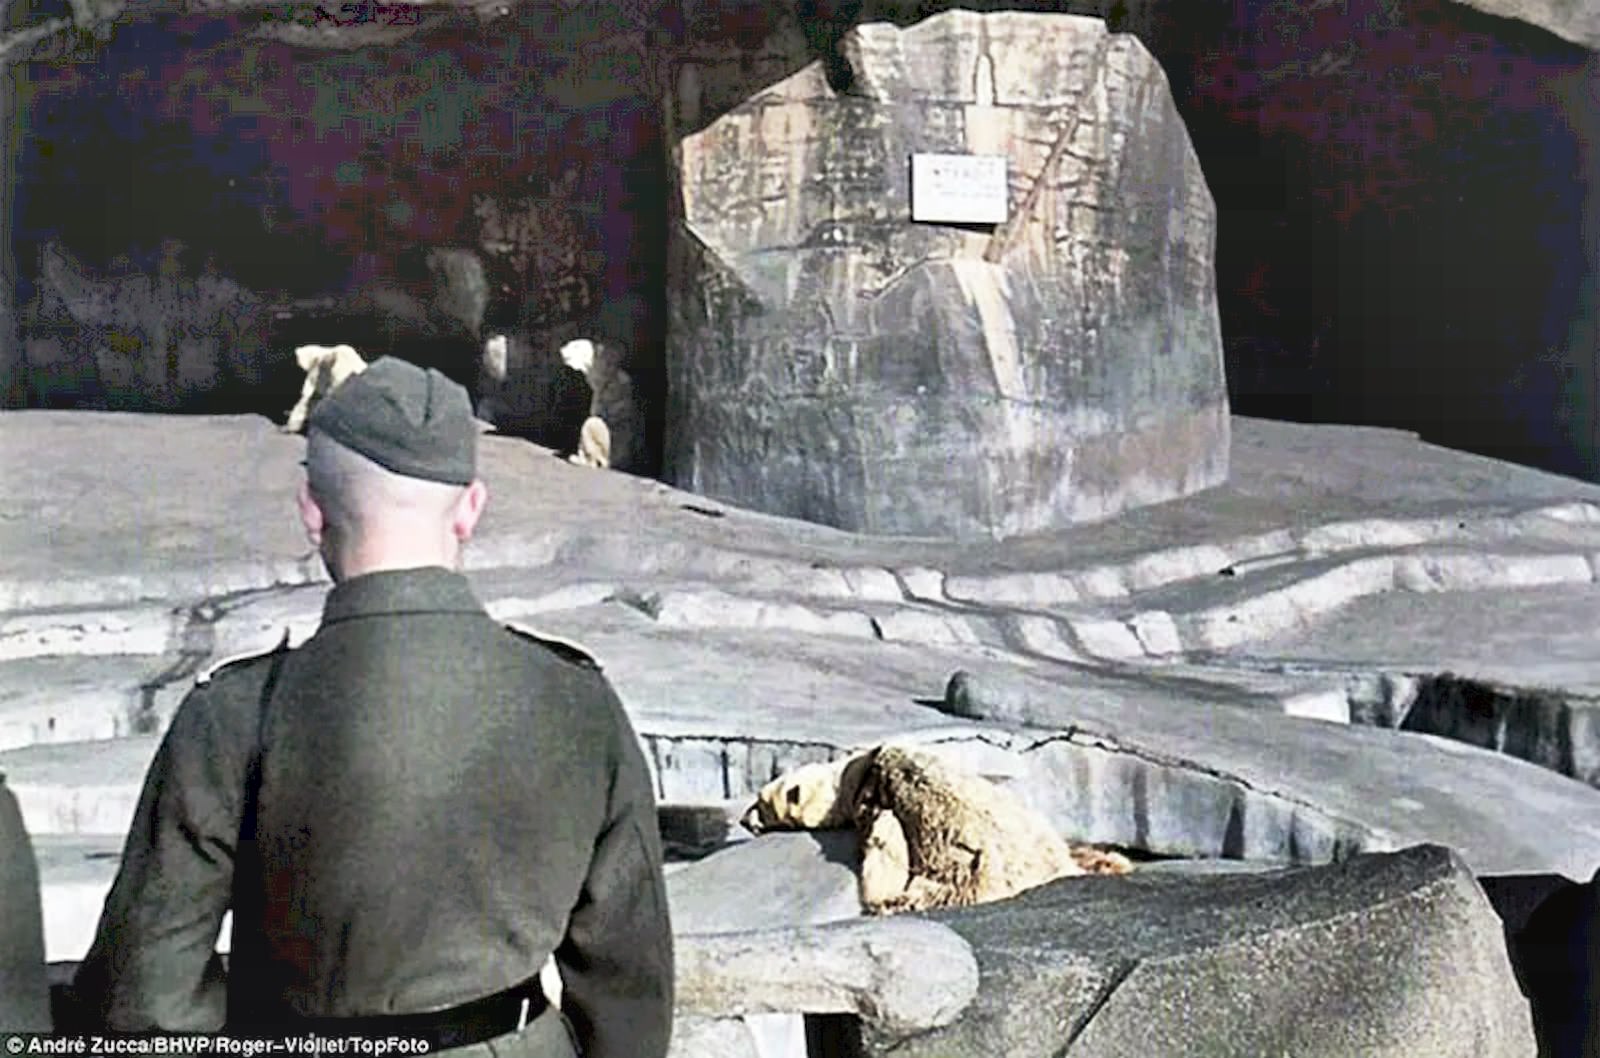 A German soldier looks on at lethargic-looking polar bears at the Ménagerie du Jardin des Plantes, Paris’s famous zoo.